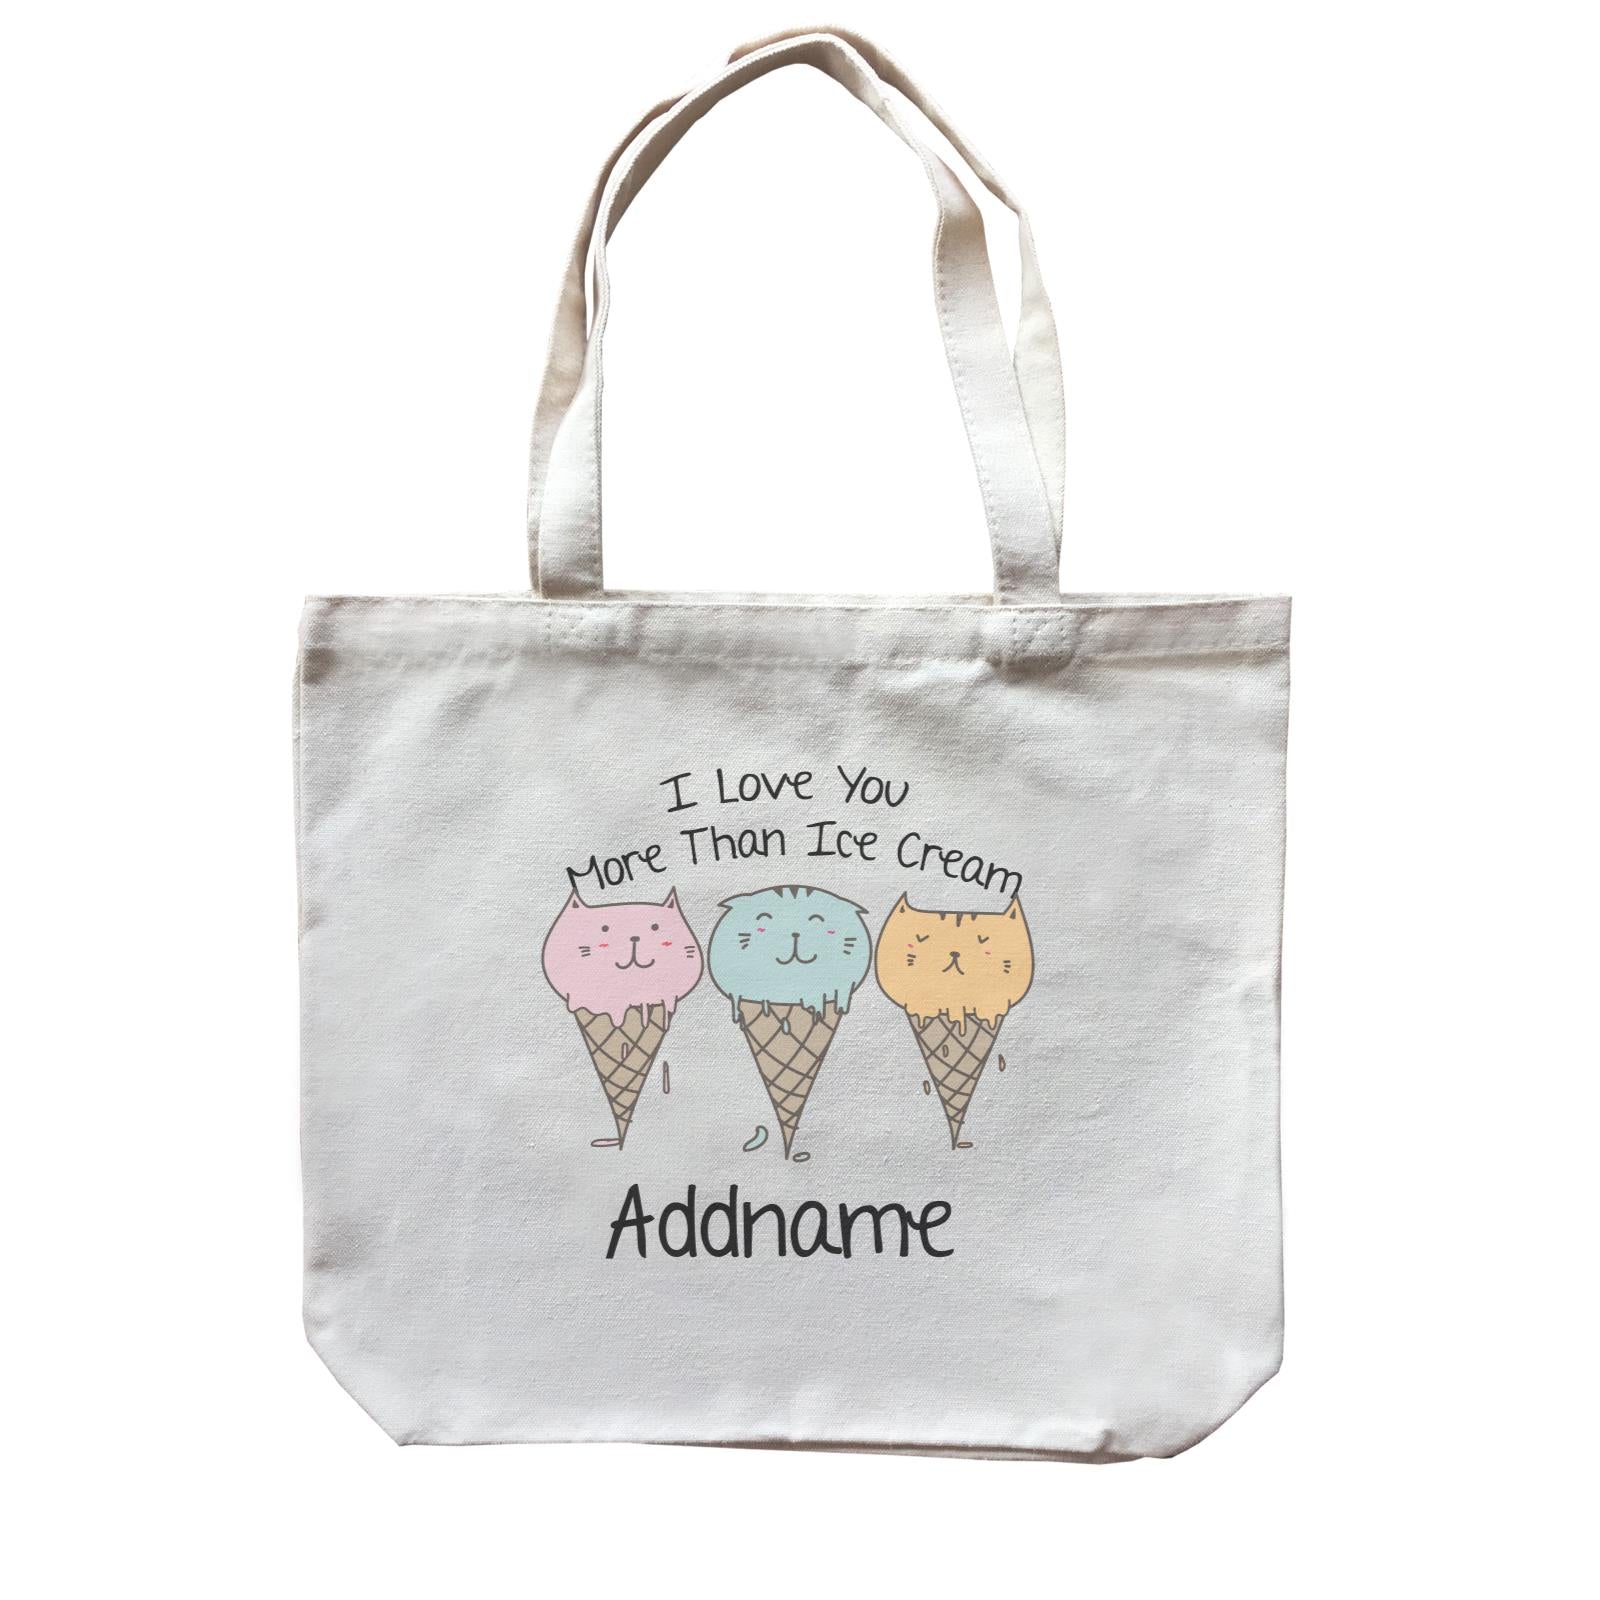 Cute Animals And Friends Series I Love You More Than Ice Cream Cats Addname Canvas Bag